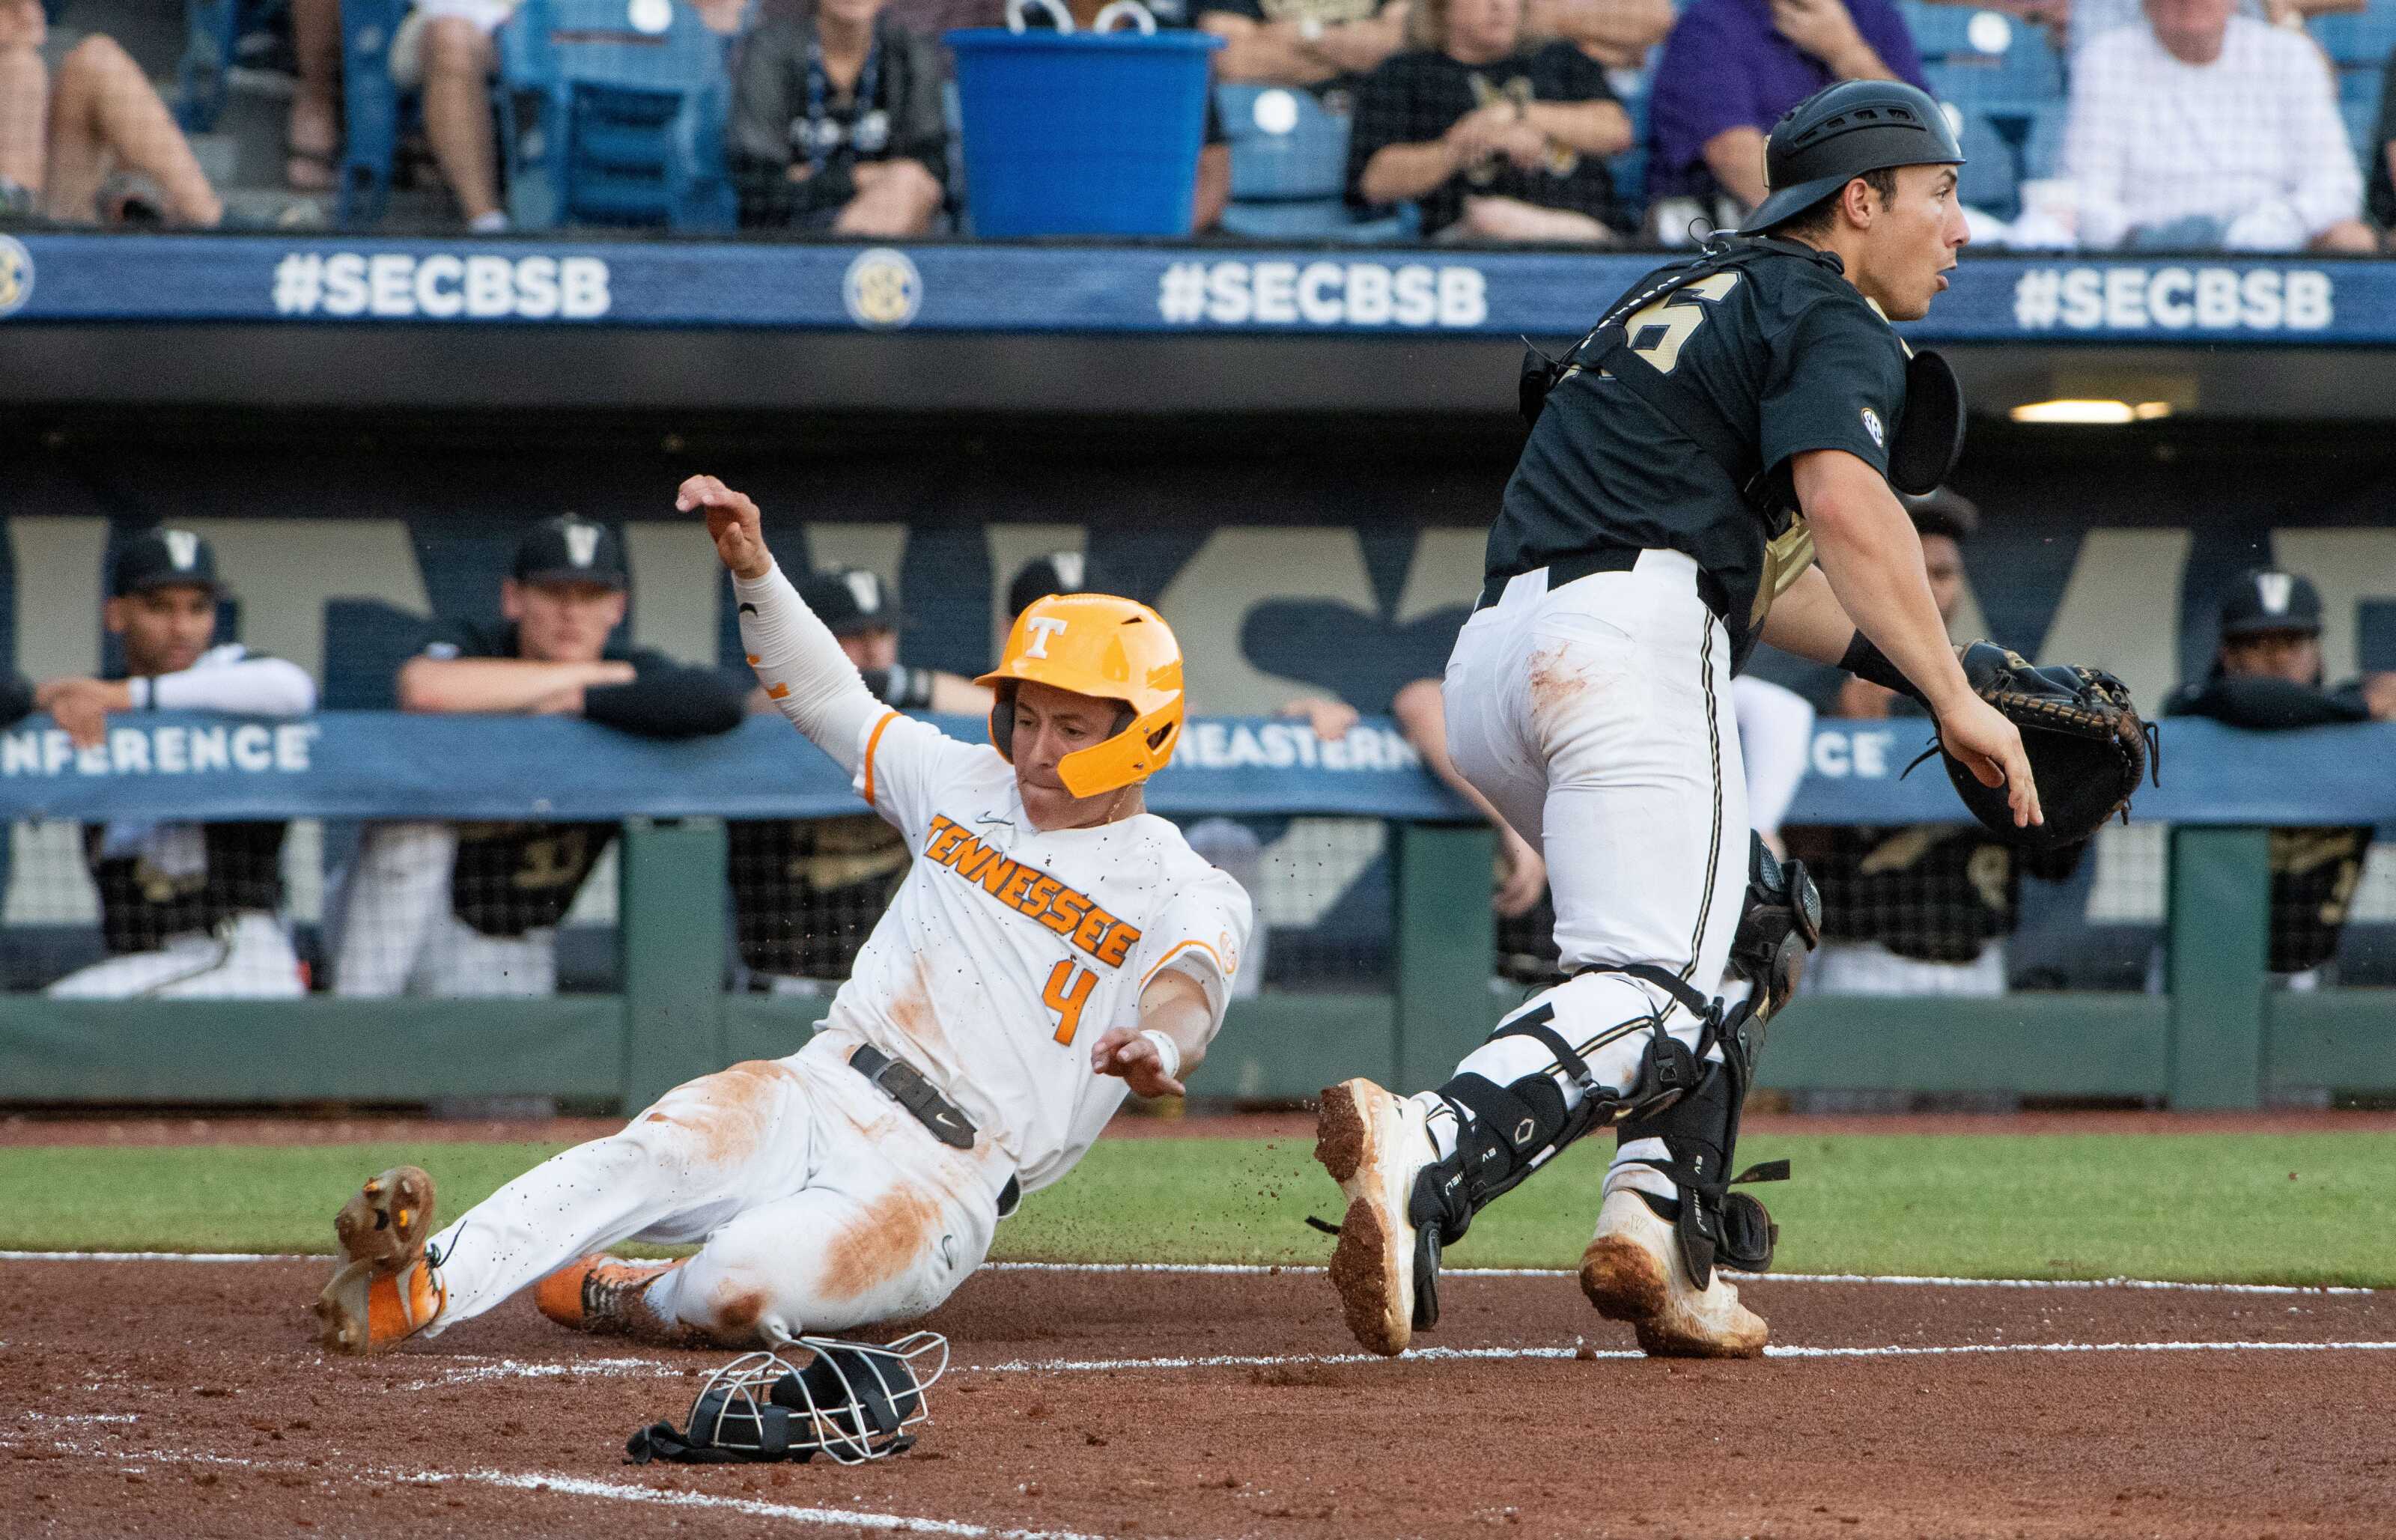 Vols Baseball: Important tests ahead for Tennessee in SEC play